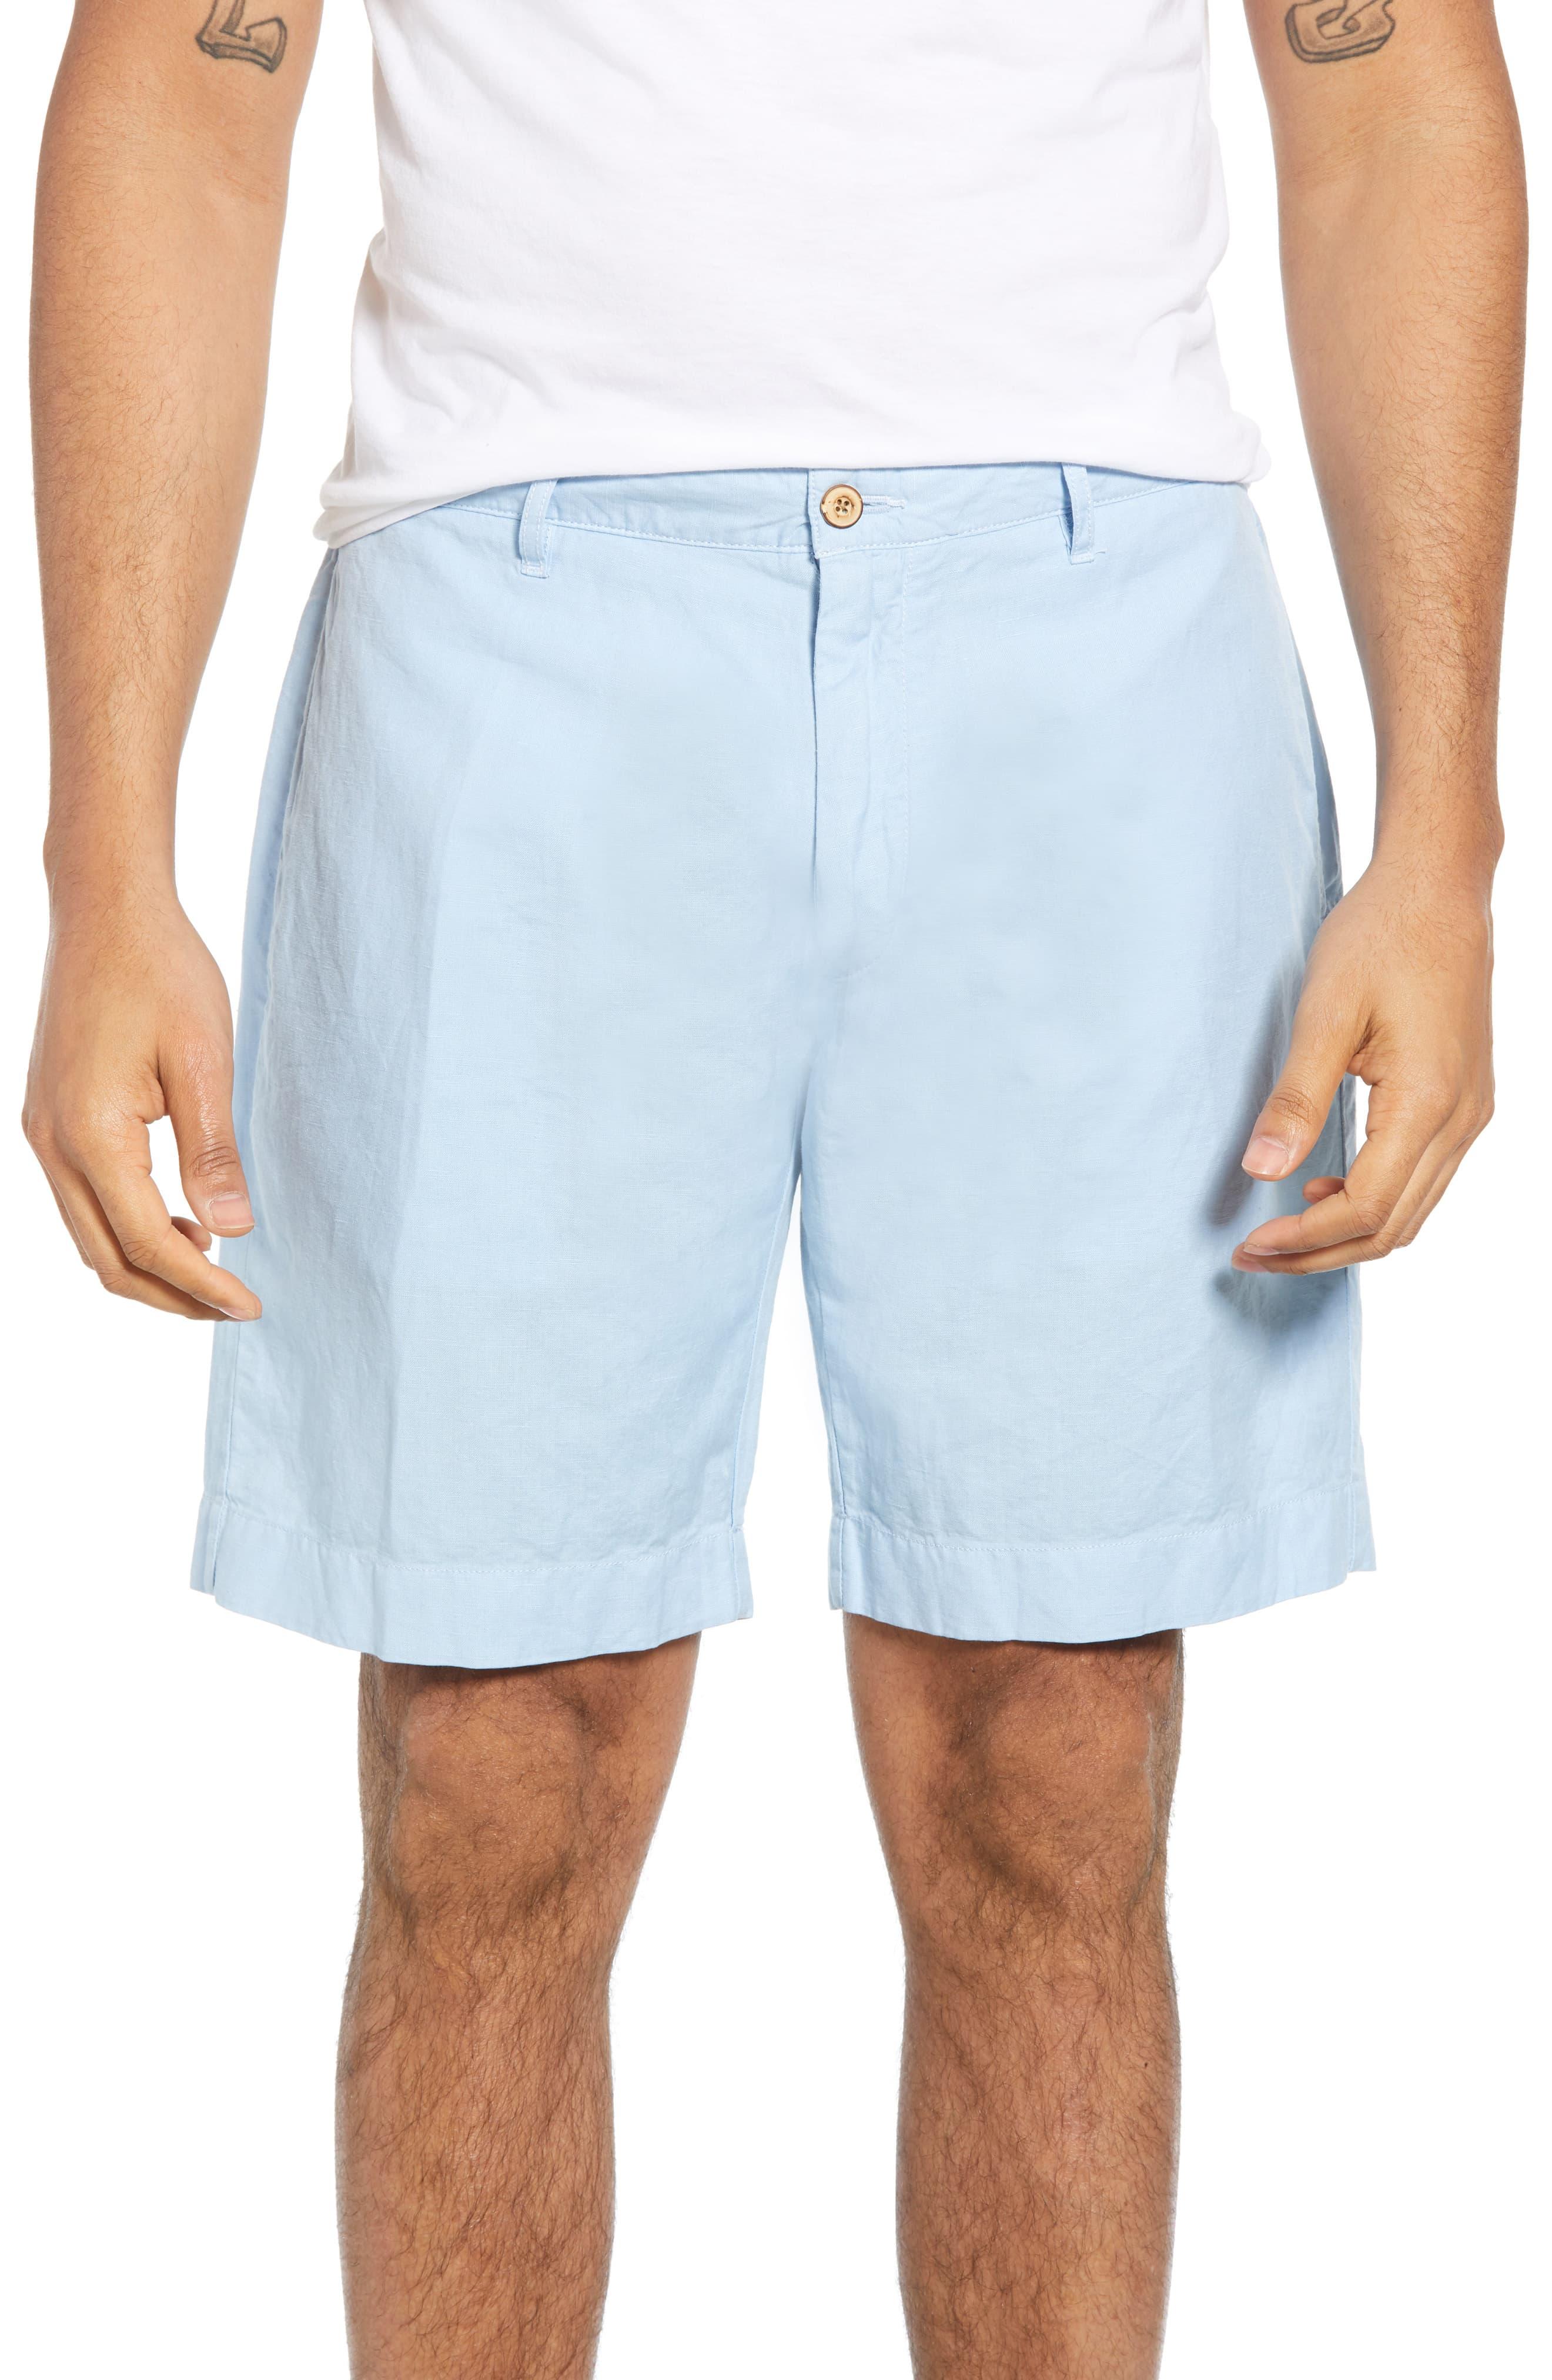 Faherty Brand Malibu Shorts in Blue for Men - Lyst